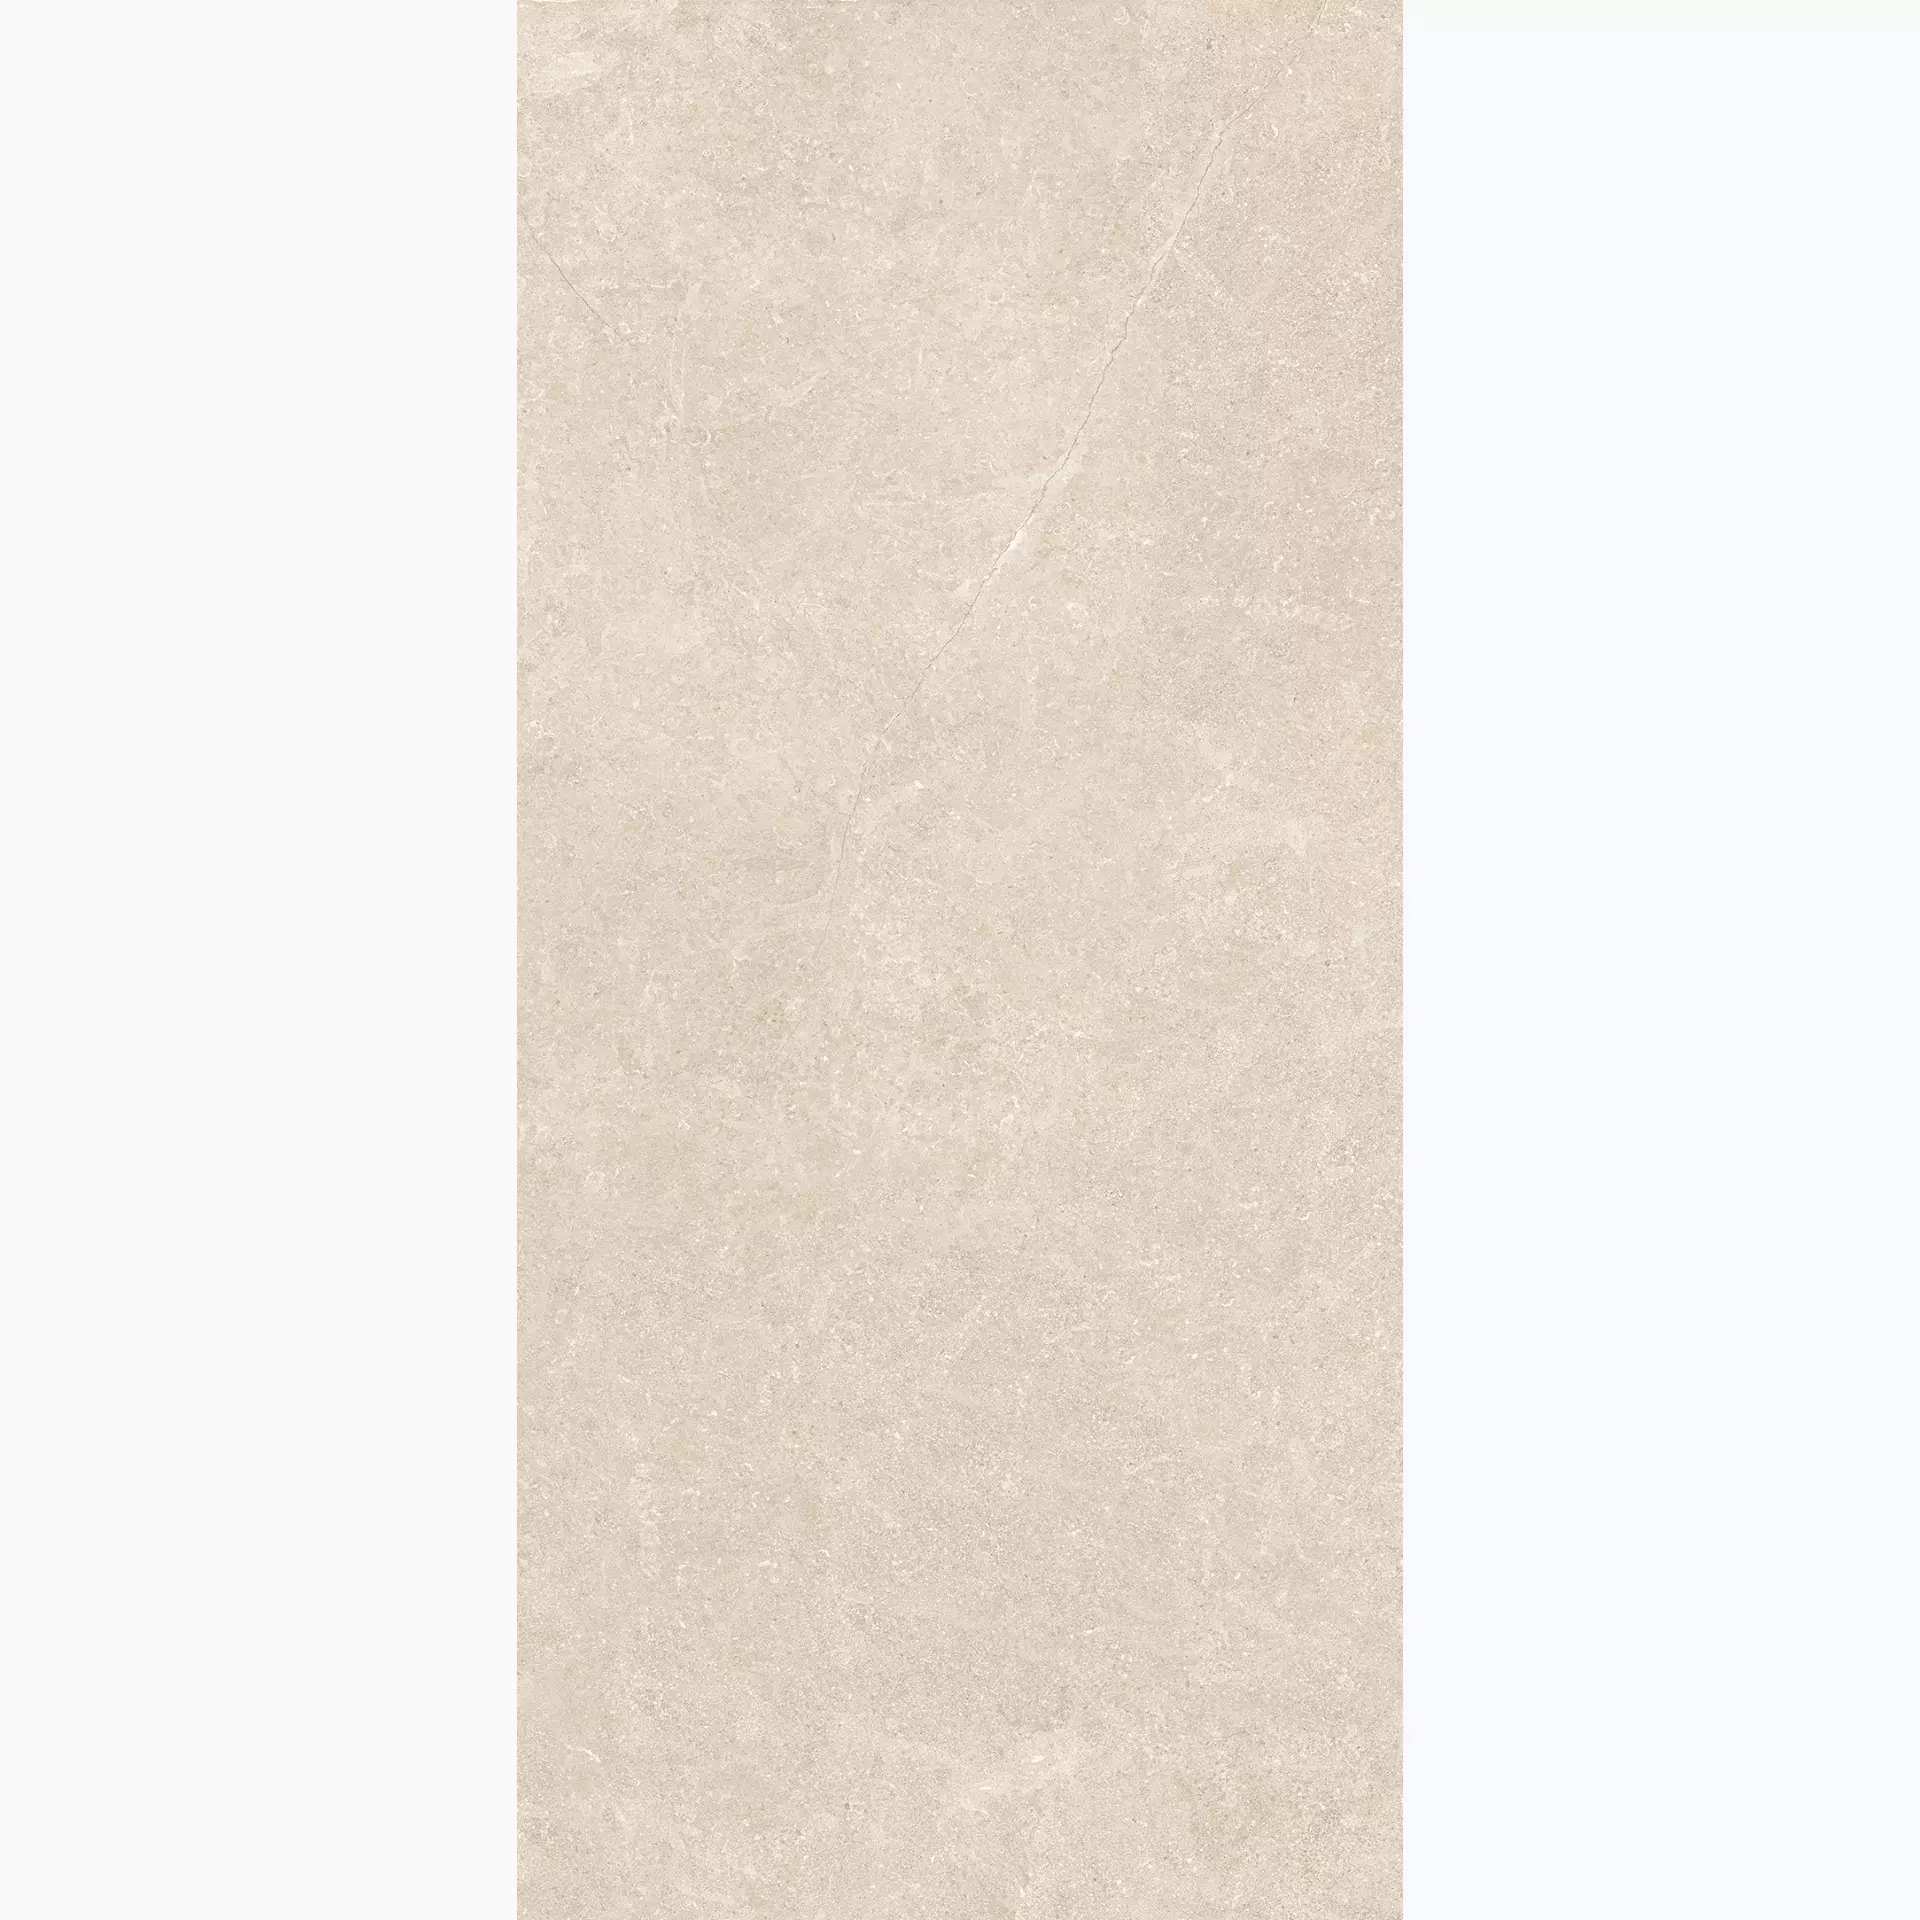 Coem Wide Gres Beige Naturale Modica 0MD262R 120x260cm rectified 6mm